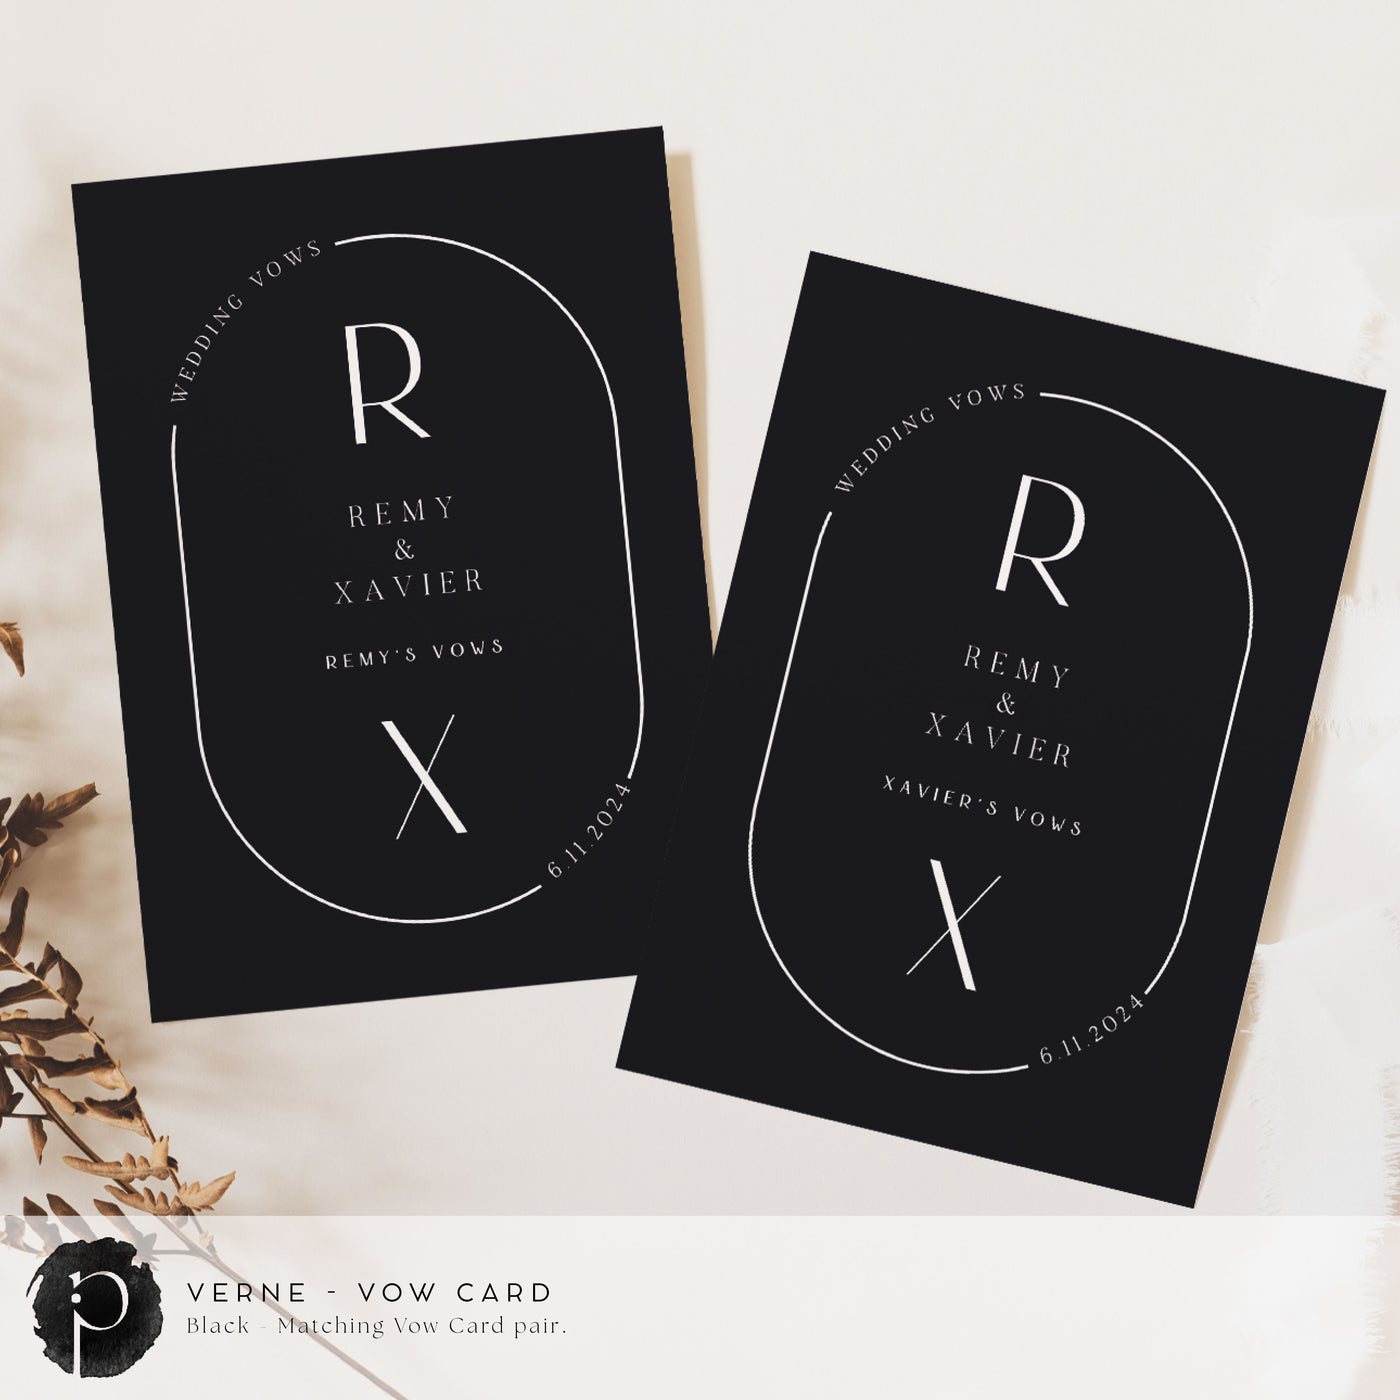 A pair of vow cards to write your wedding vows on in a modern midcentury wedding theme with white writing on a black background